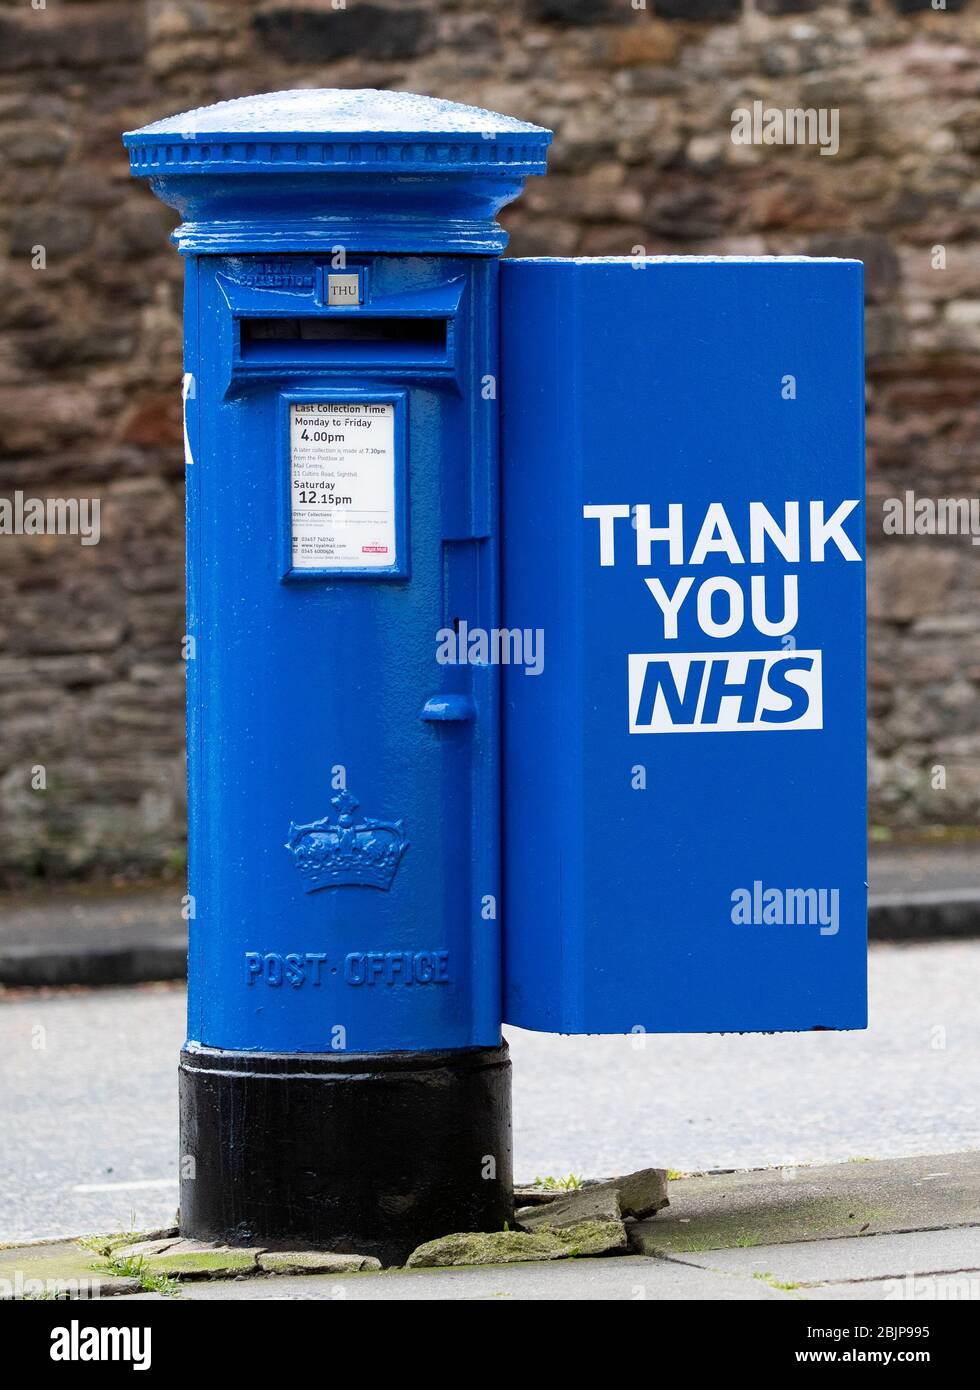 One of the specially decorated postboxes in Edinburgh painted blue in support of NHS workers and carers fighting the coronavirus pandemic. Stock Photo